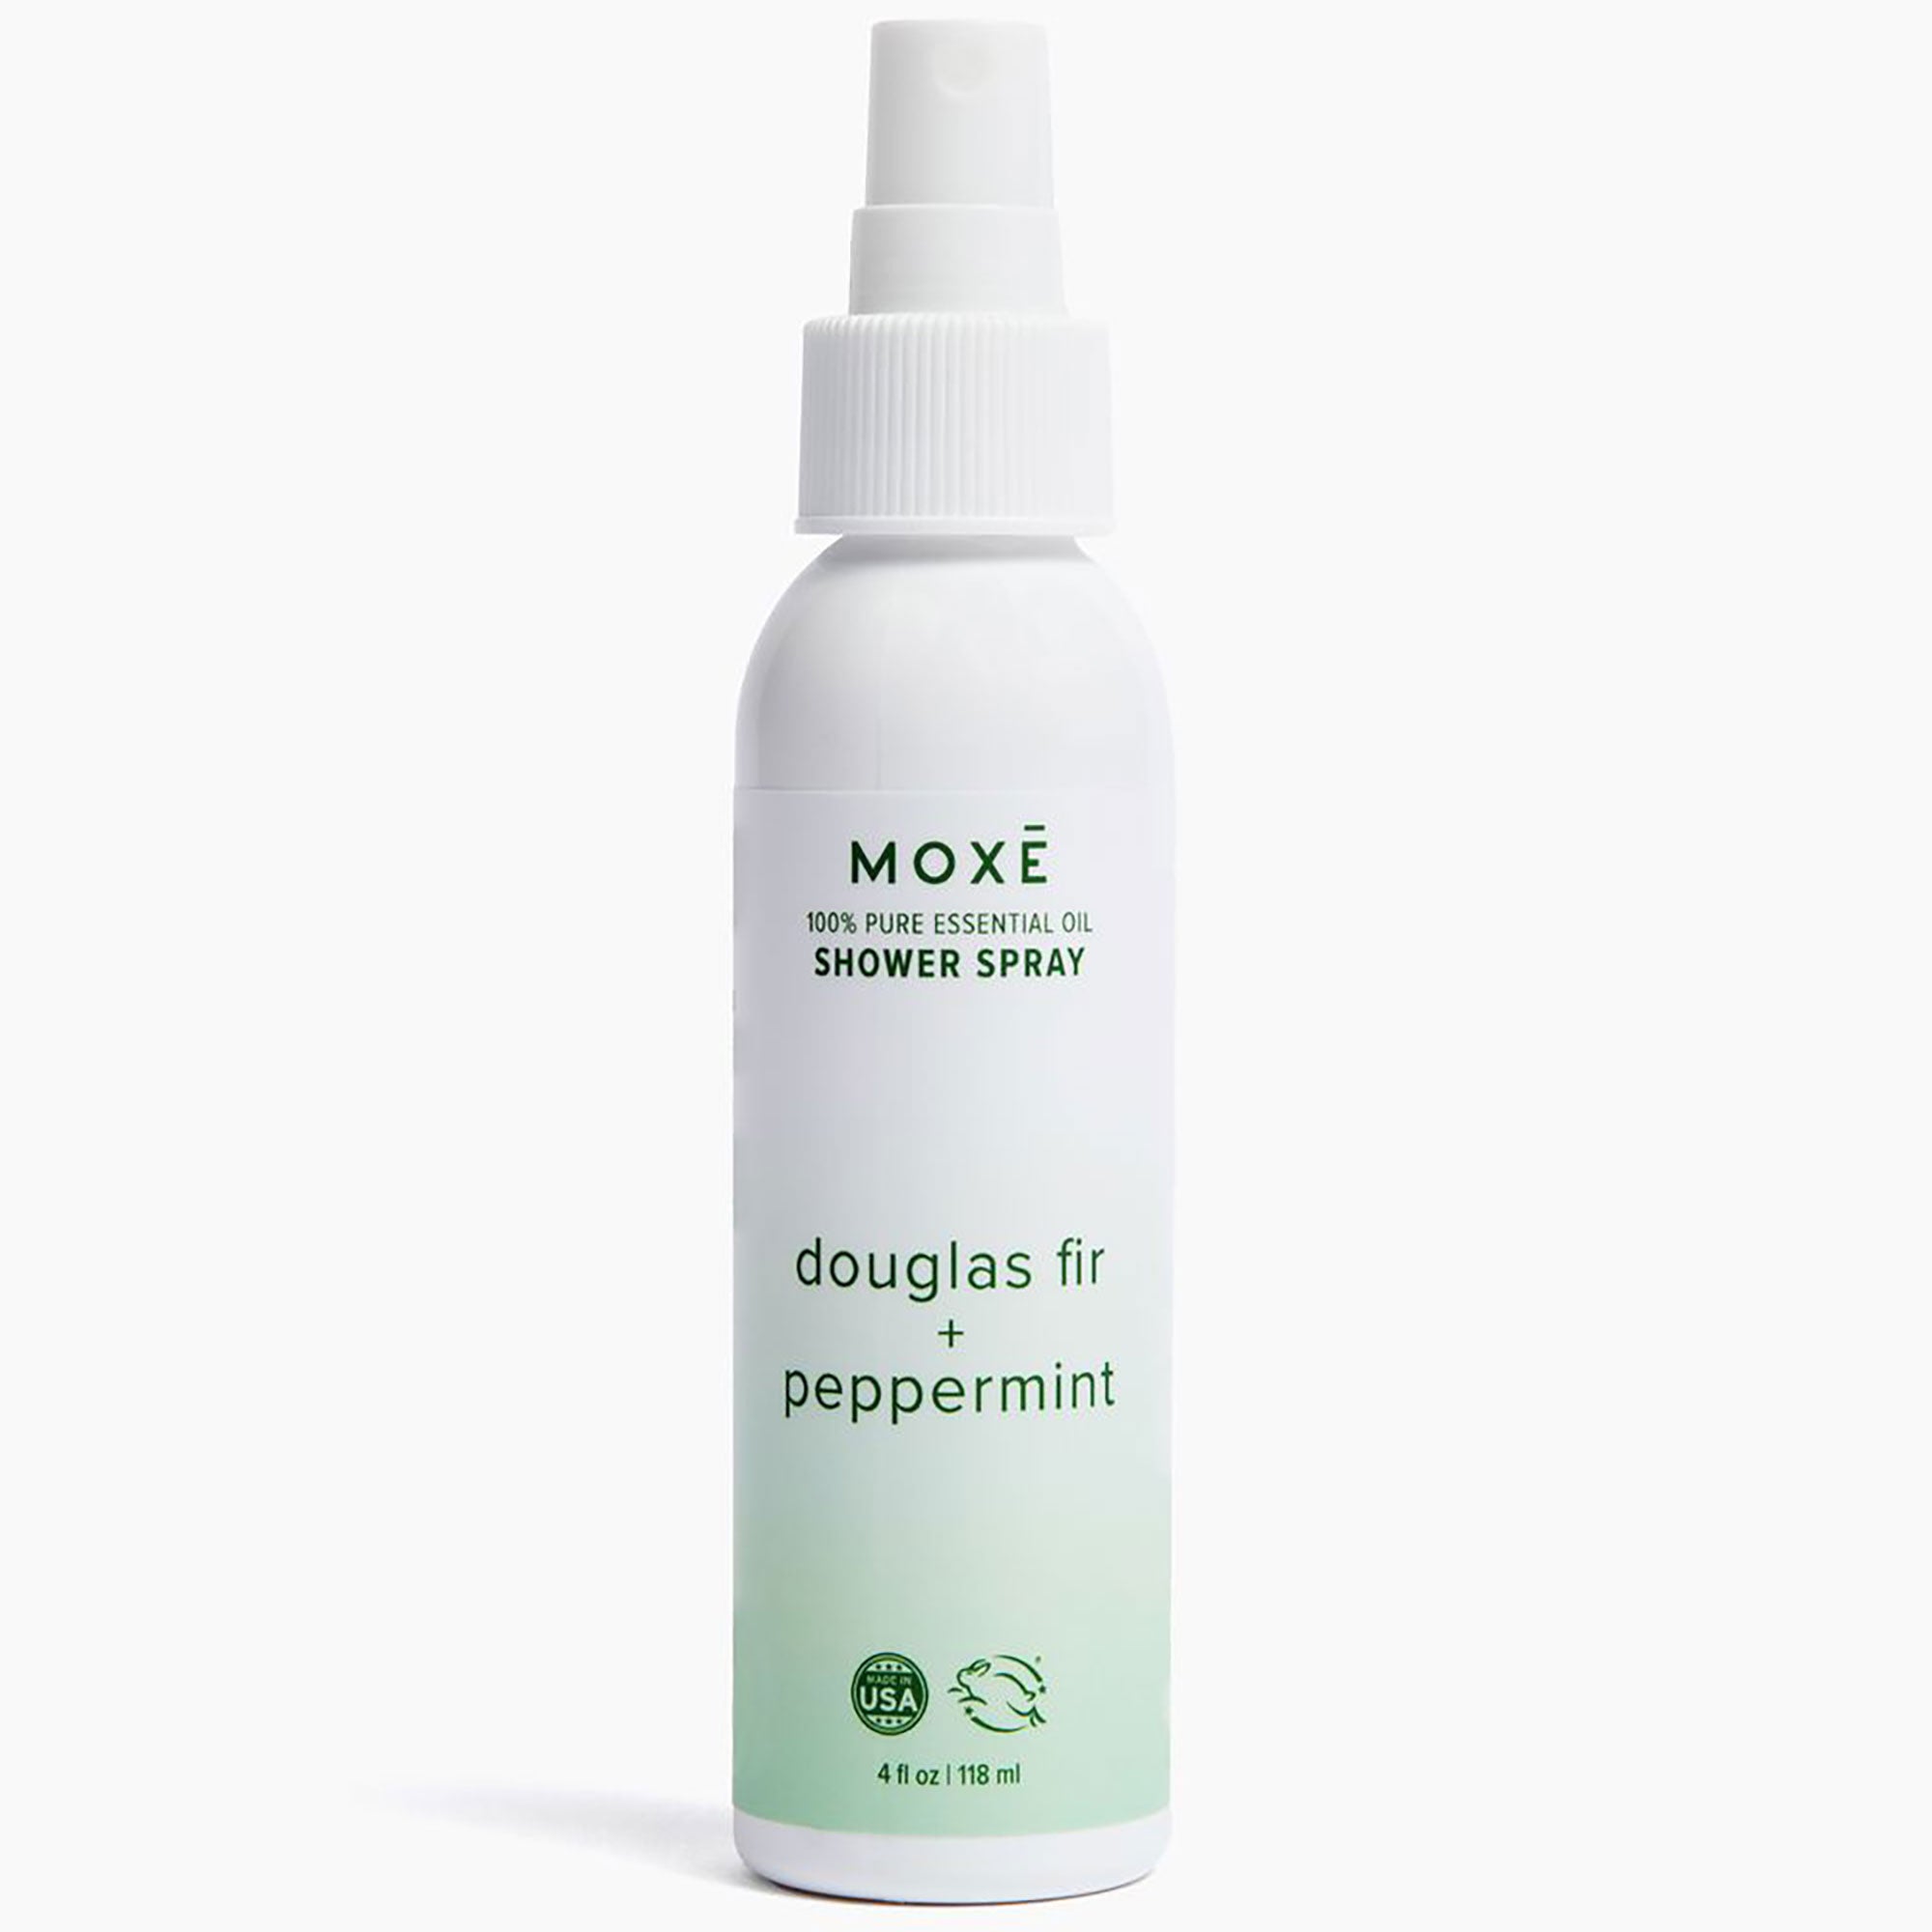 Complete Guide on How to Make Your Own Lotion With Essential Oils – MOXĒ